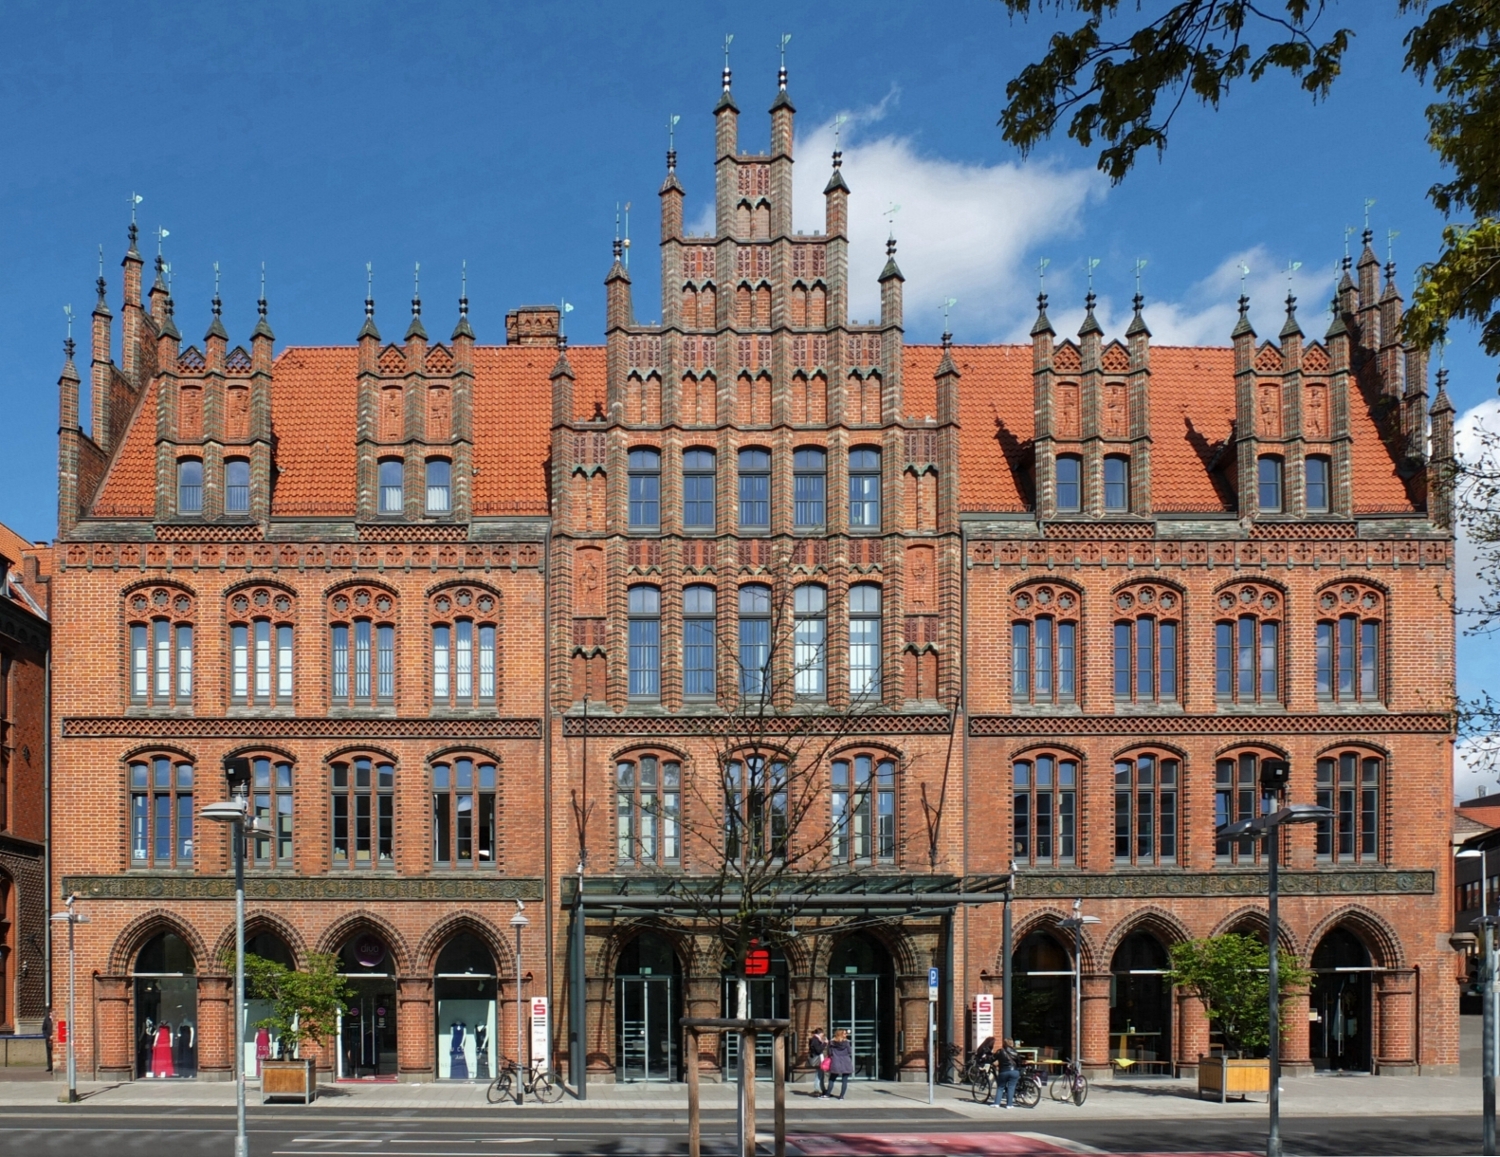 https://www.yizuo-media.com/photos/cpg/albums/userpics/10002/Hannover_altes_rathaus.jpg